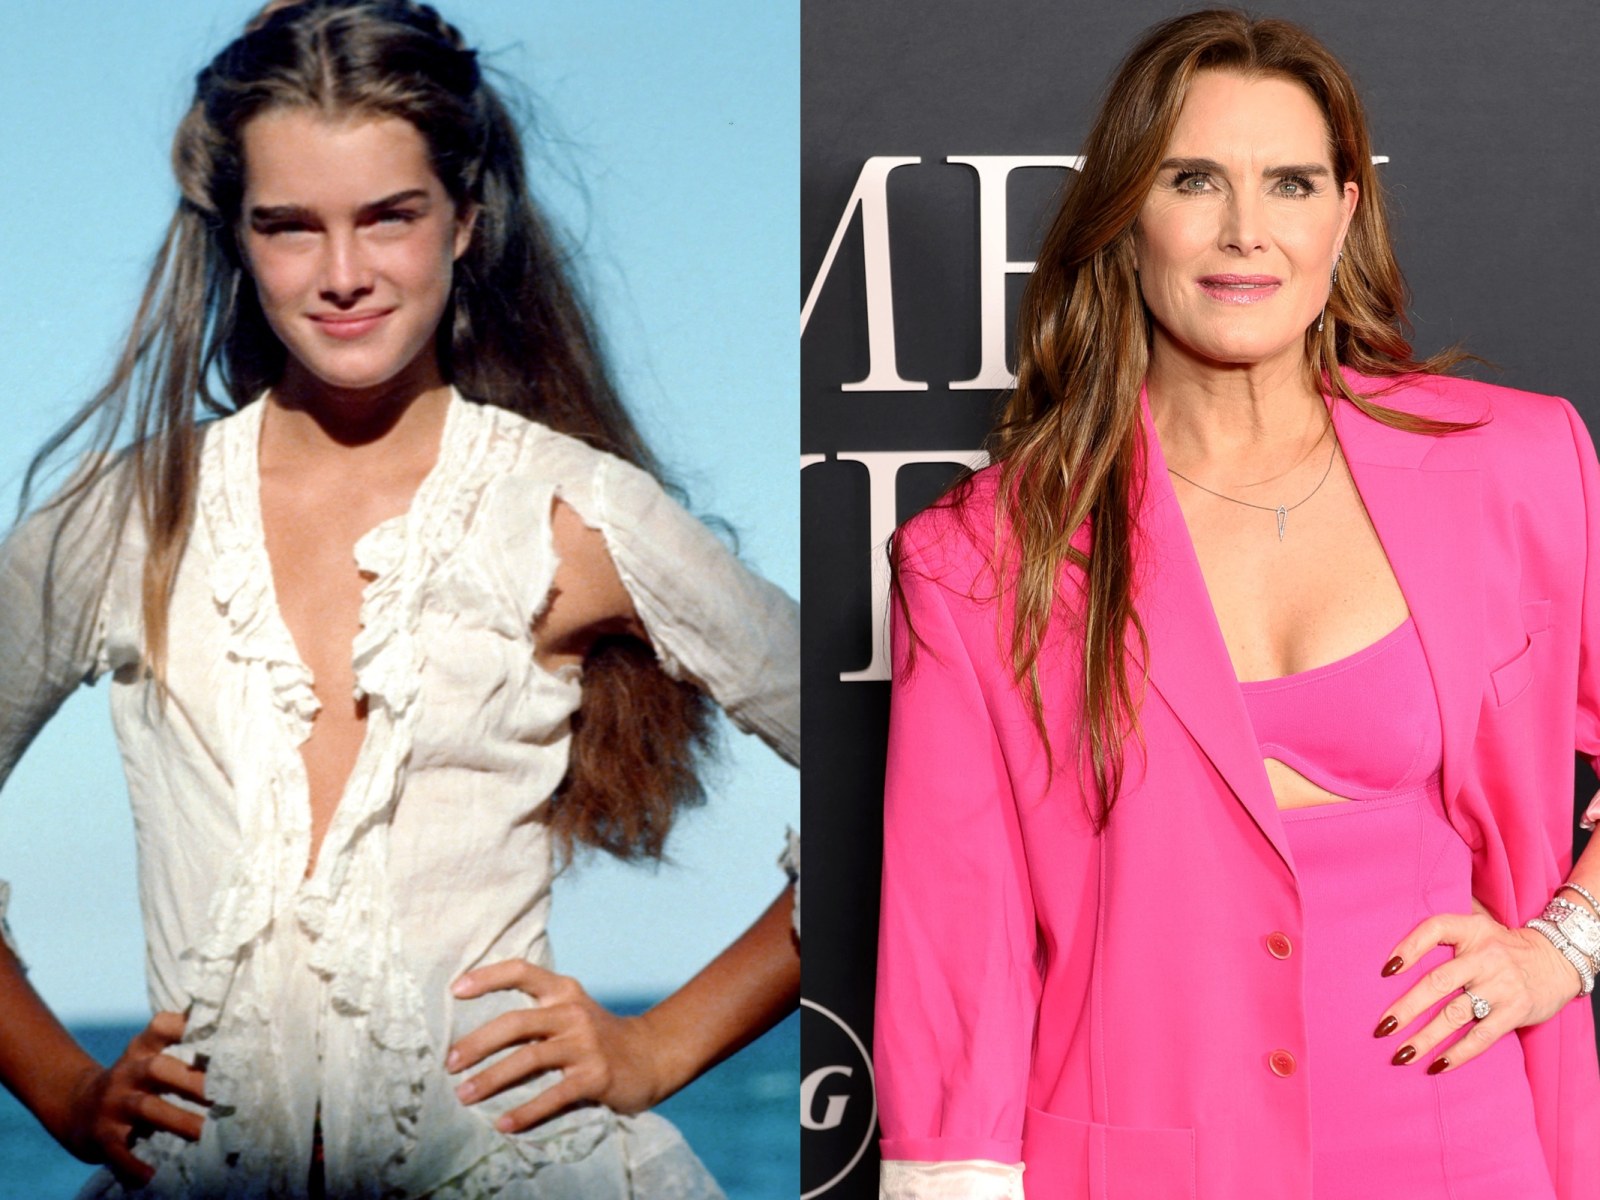 Cute Nudist - Brooke Shields' Sexualization as a Child Was Staggering